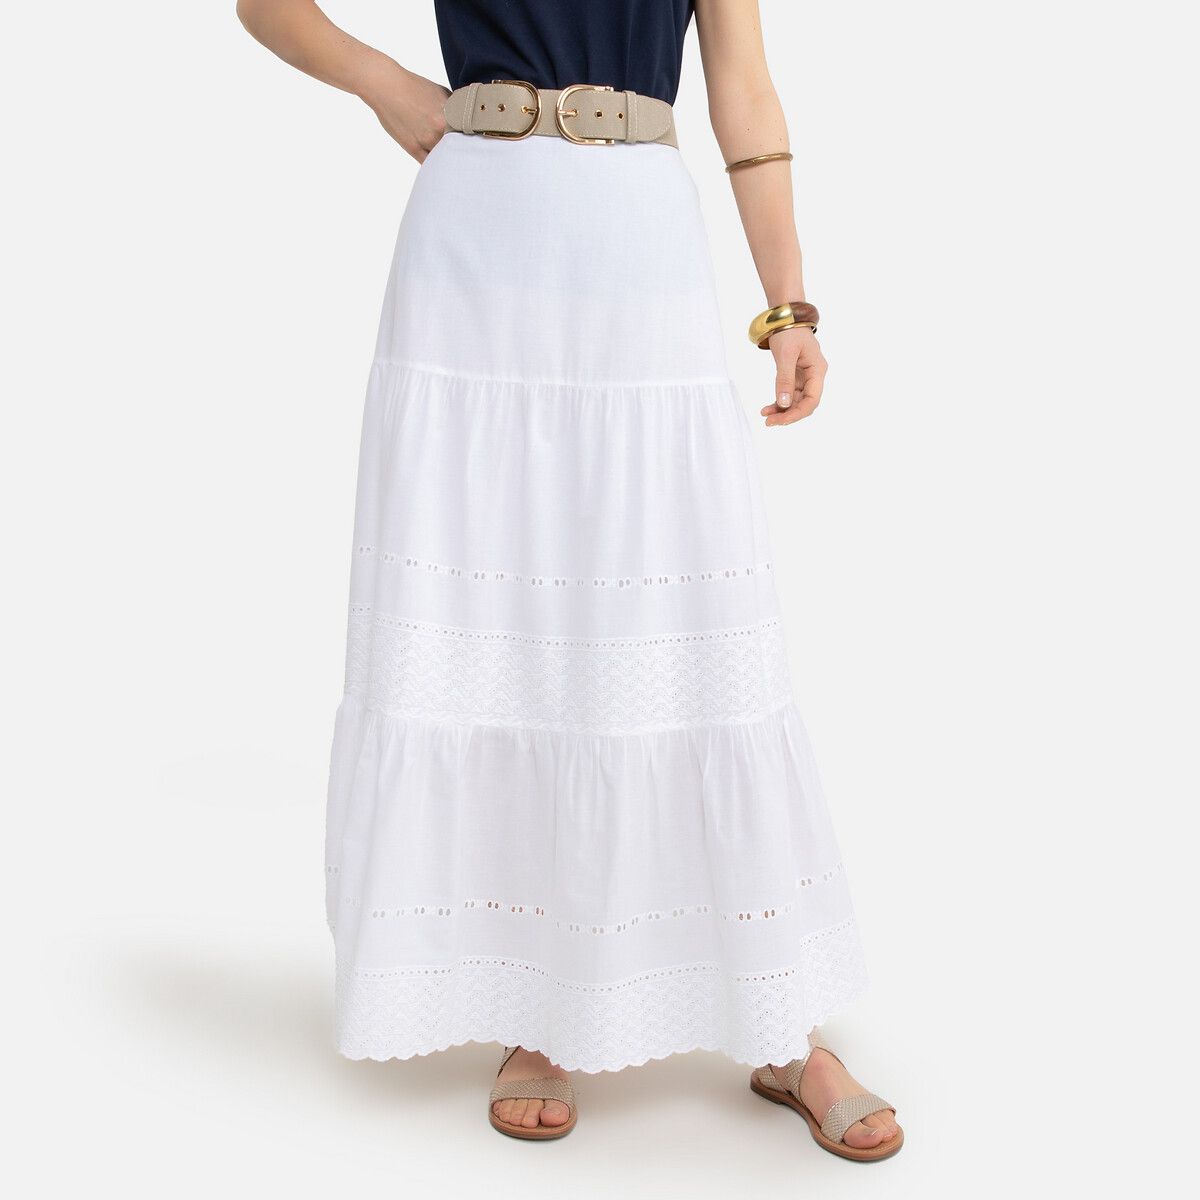 Broderie Anglaise Maxi Skirt in Cotton with Tiers | La Redoute (UK)